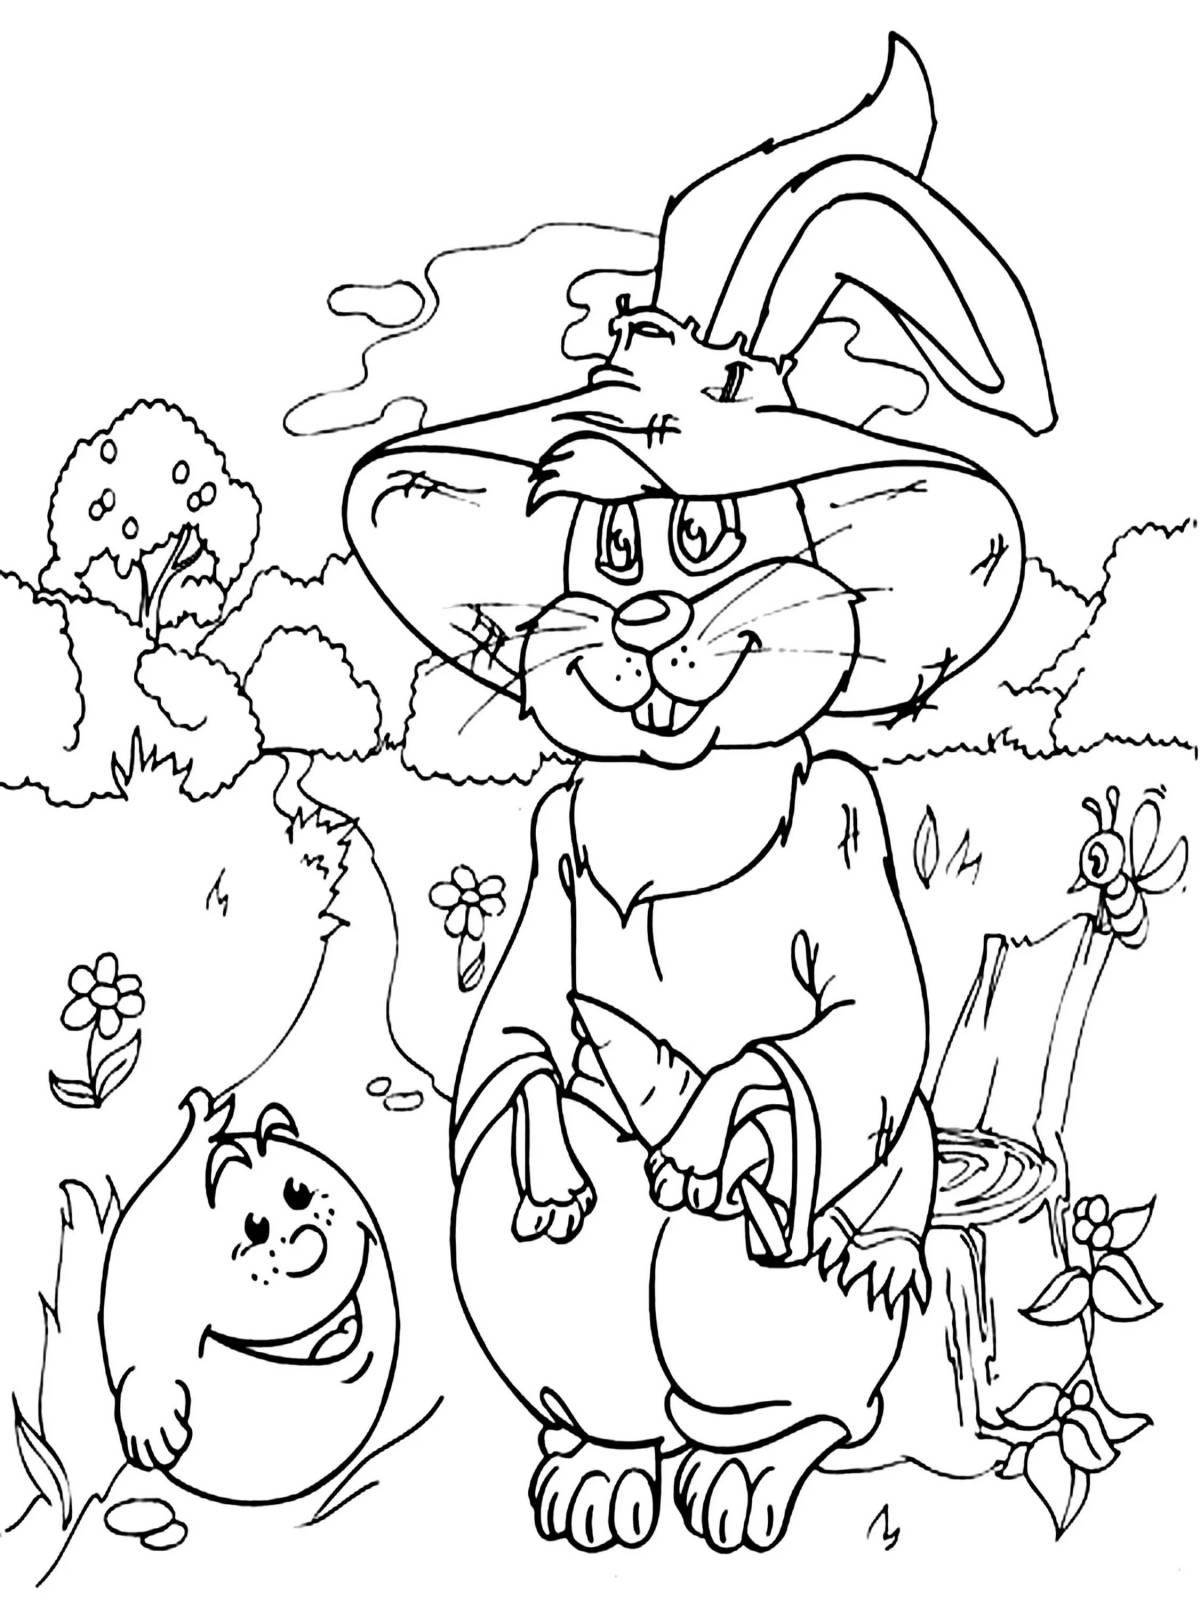 Adorable fairy tale character coloring book for little ones